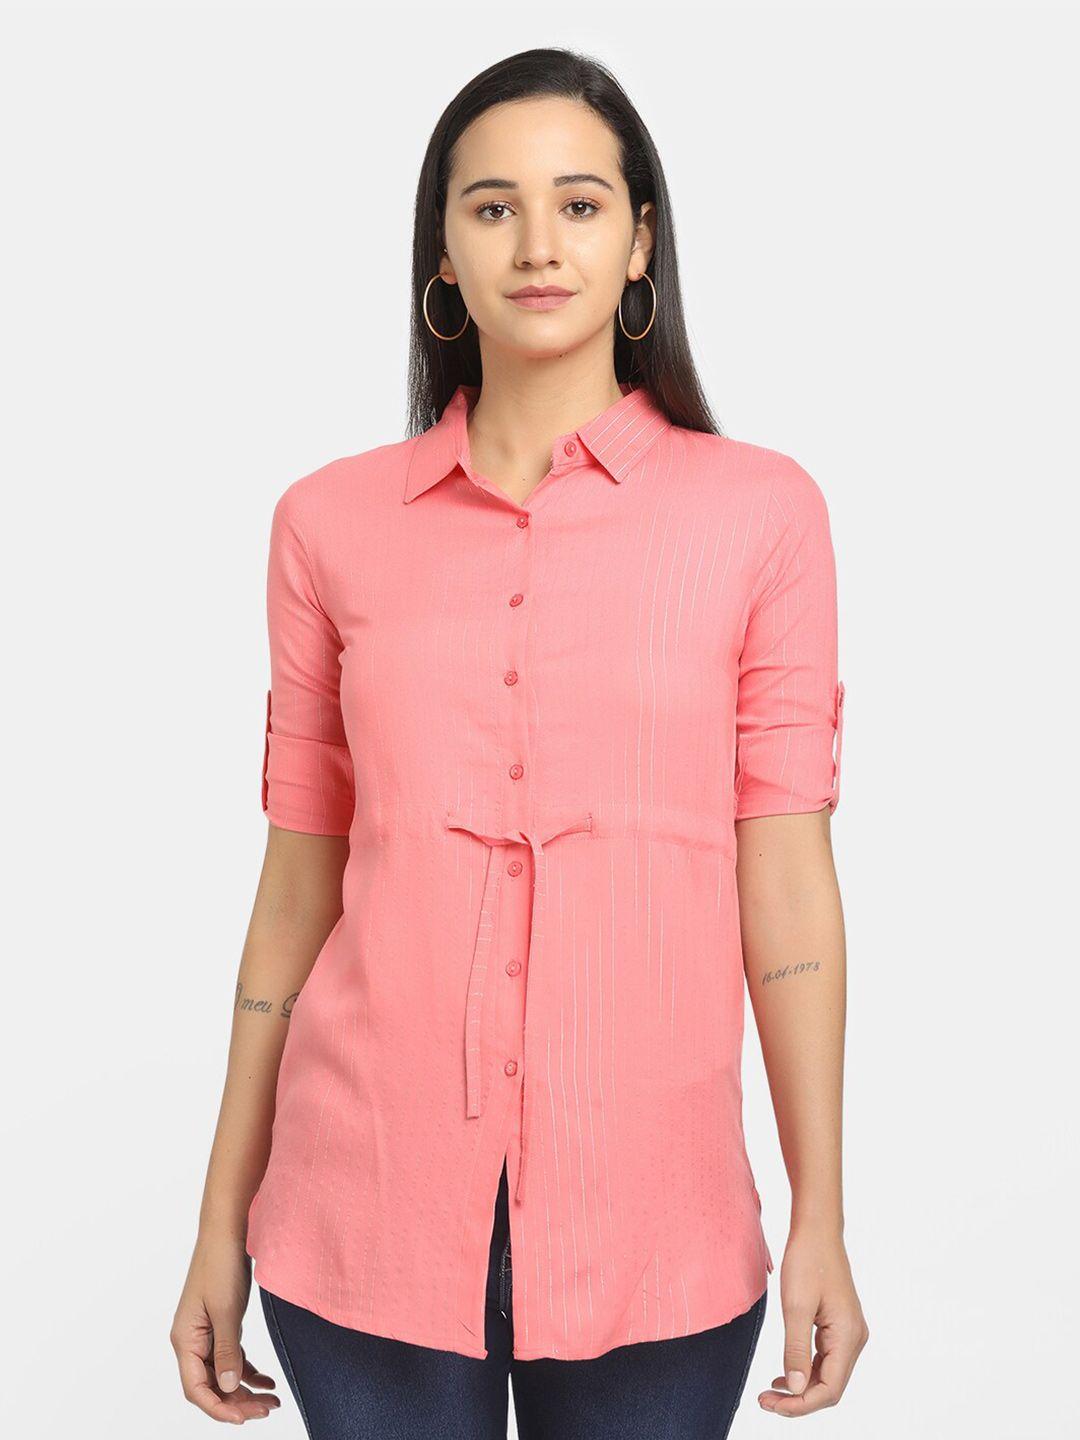 v-mart women coral regular fit classic striped casual shirt